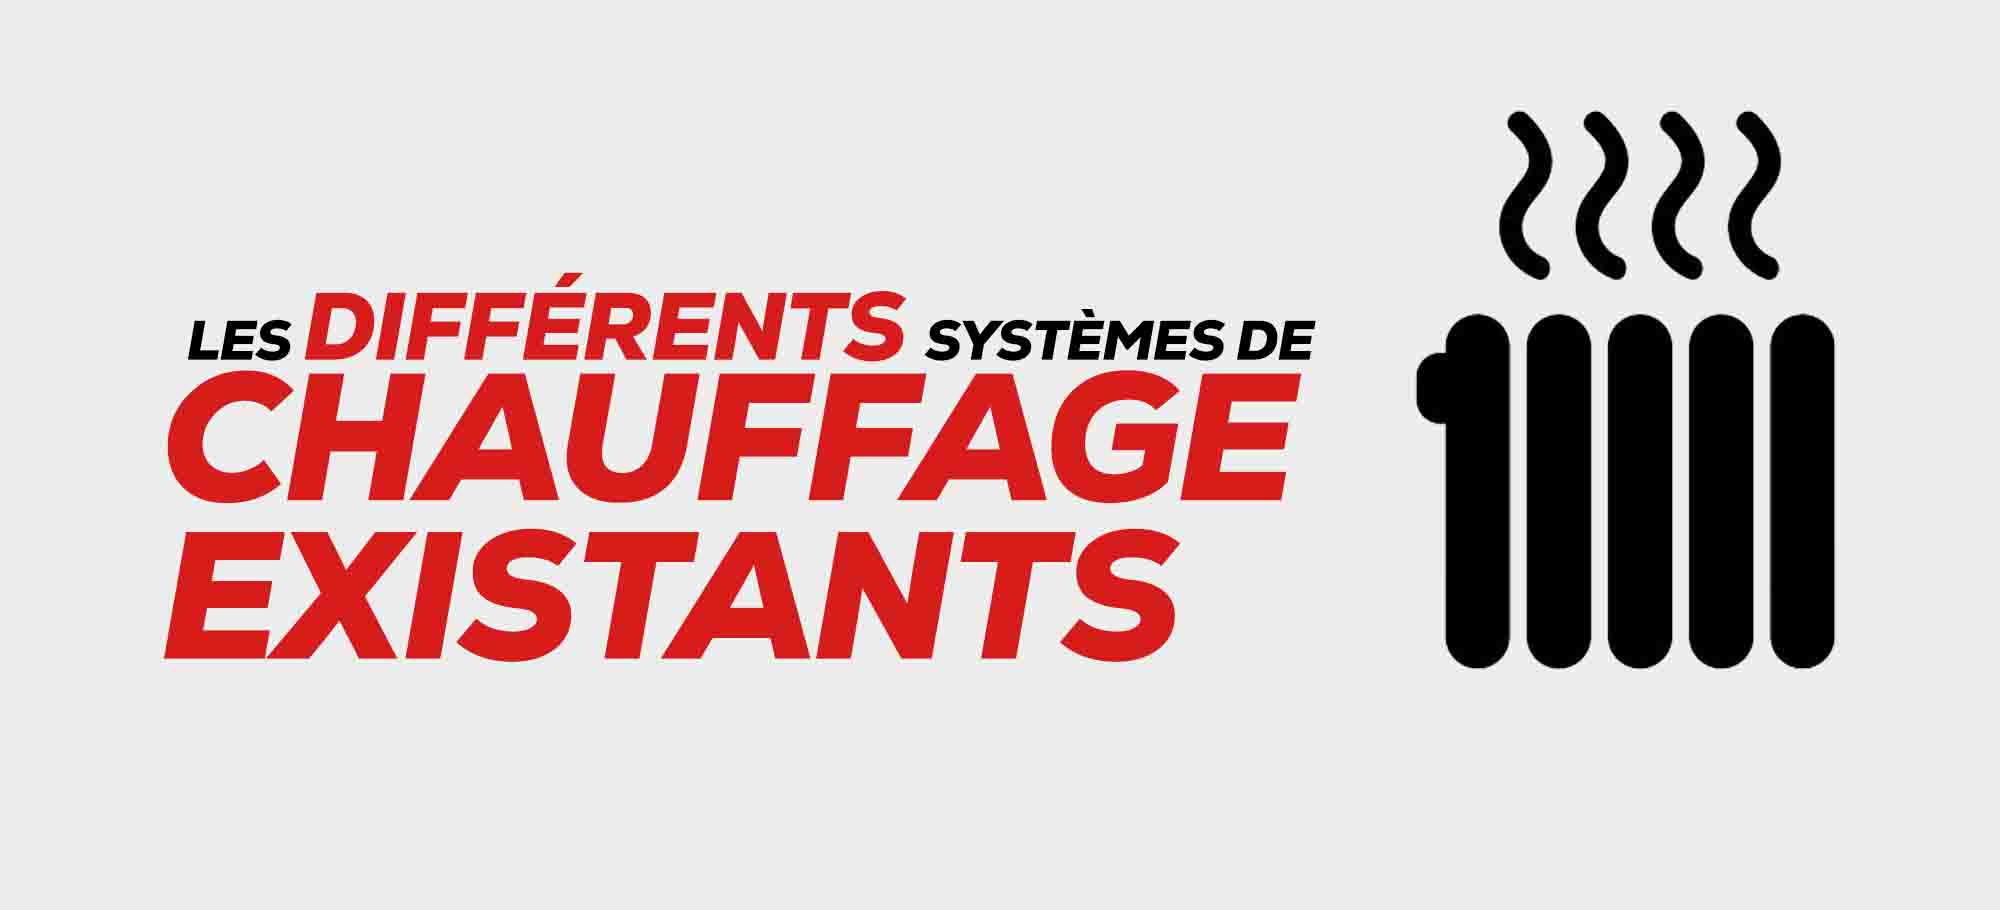 You are currently viewing Les différents systèmes de chauffage existants